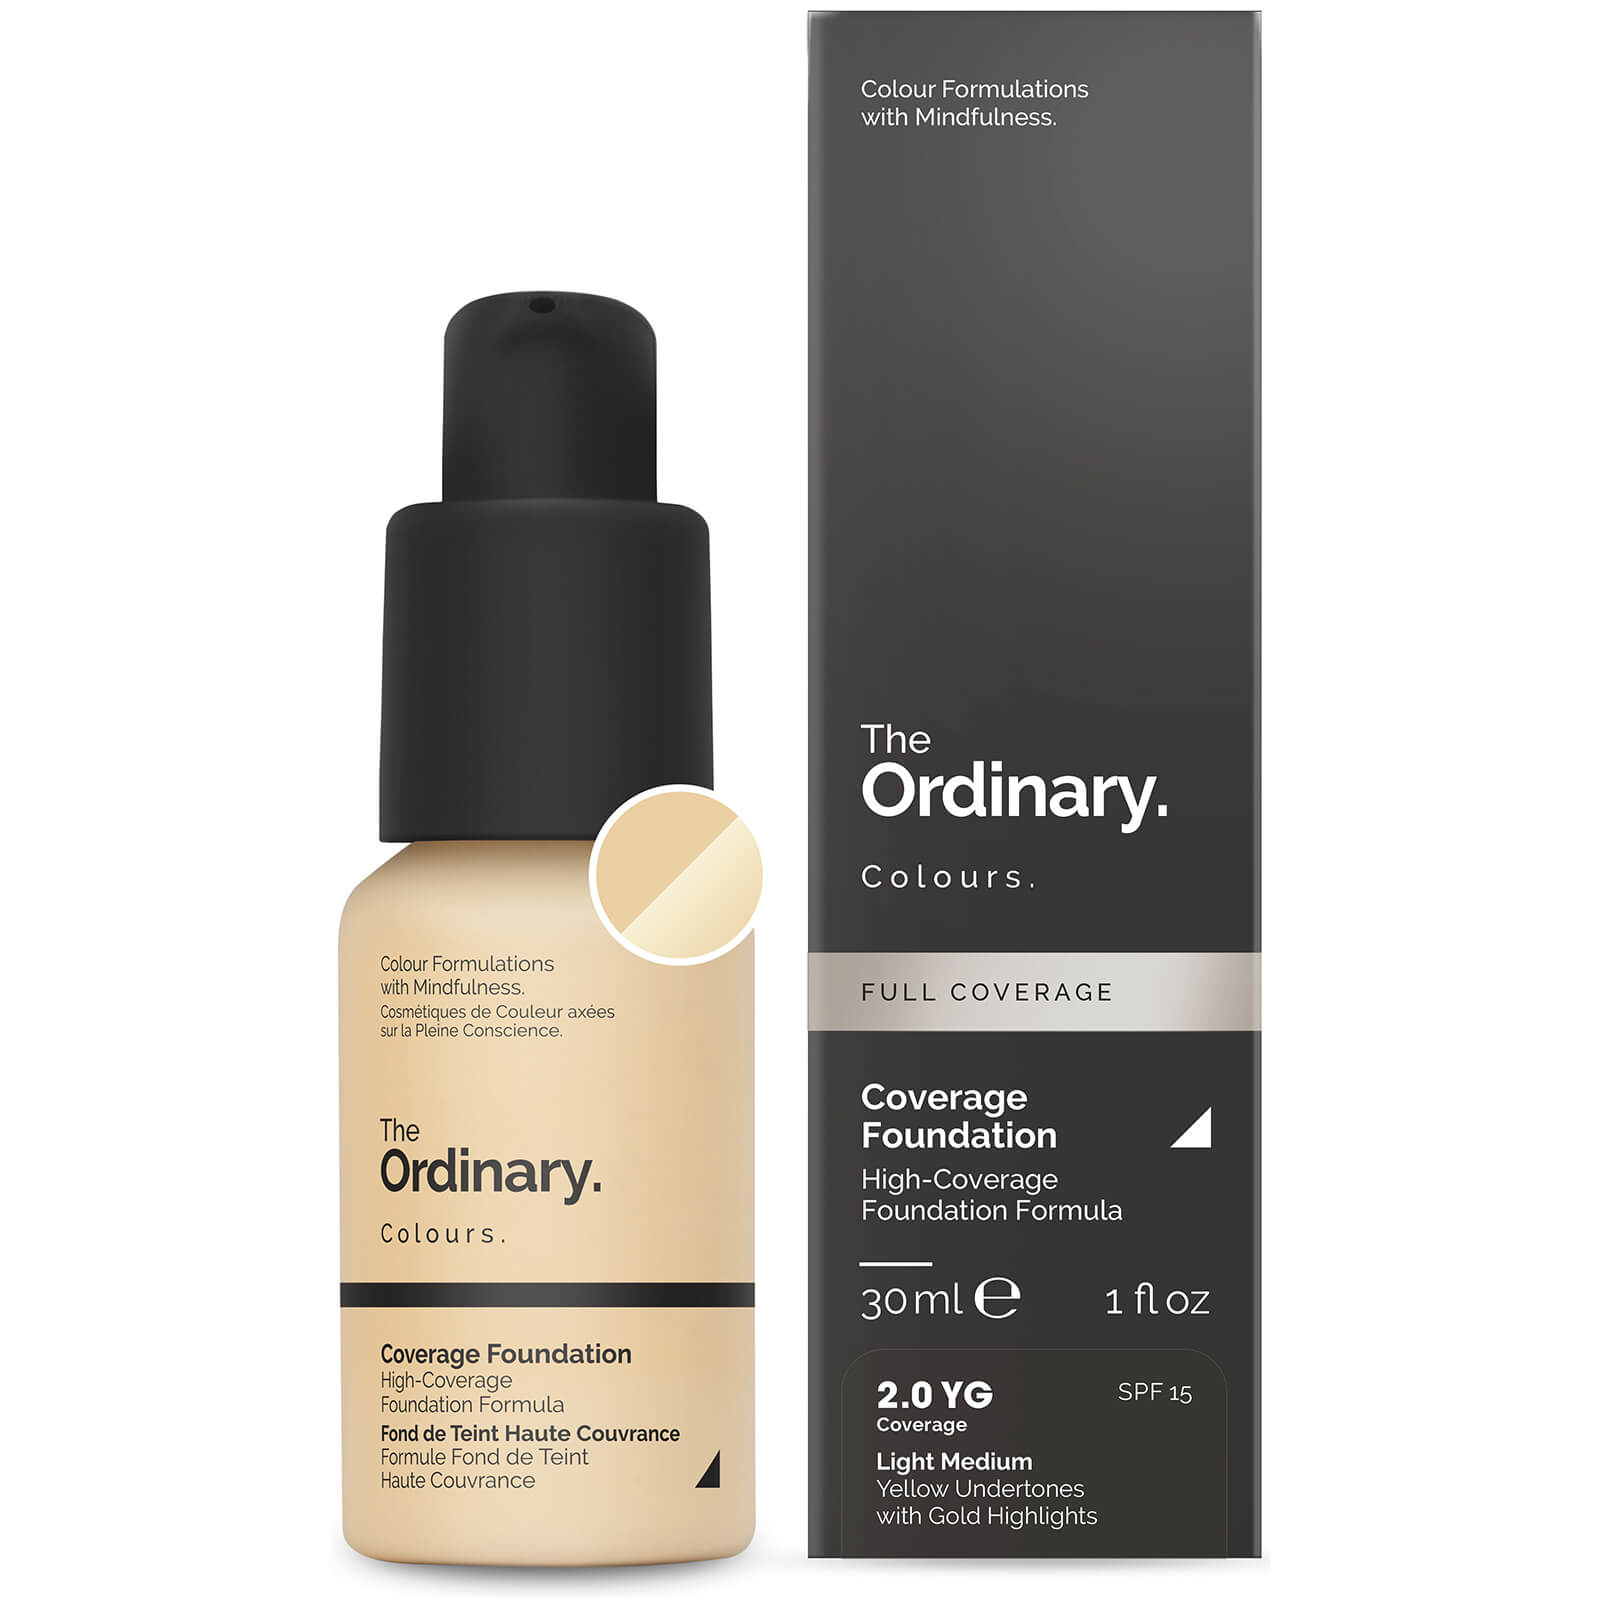 The Ordinary Coverage Foundation with SPF 15 by The Ordinary Colours 30ml (Various Shades) - 2.0YG